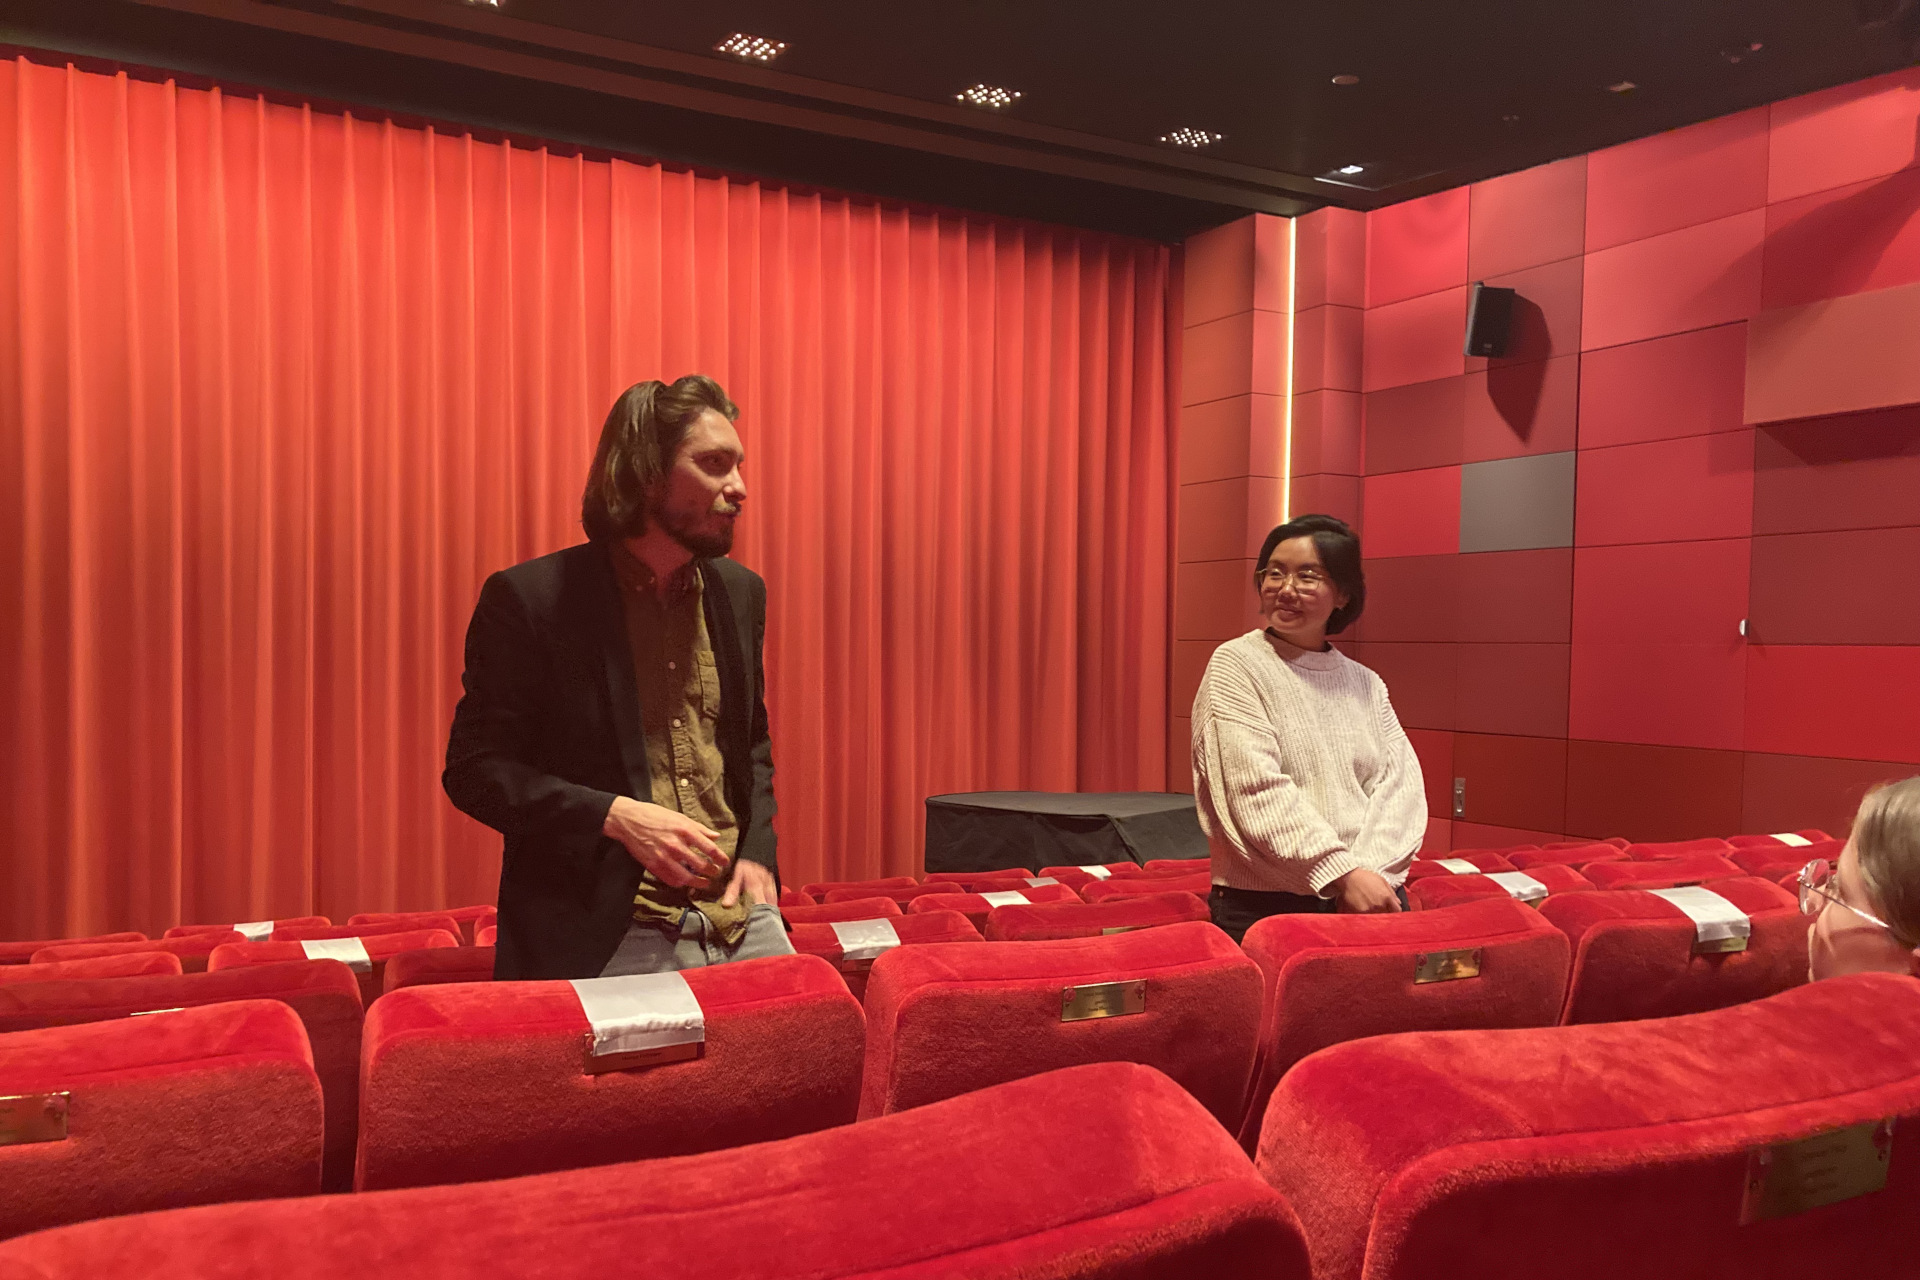 Director Tali Barde and project coordinator Hien Mai in conversation at the DFF cinema.